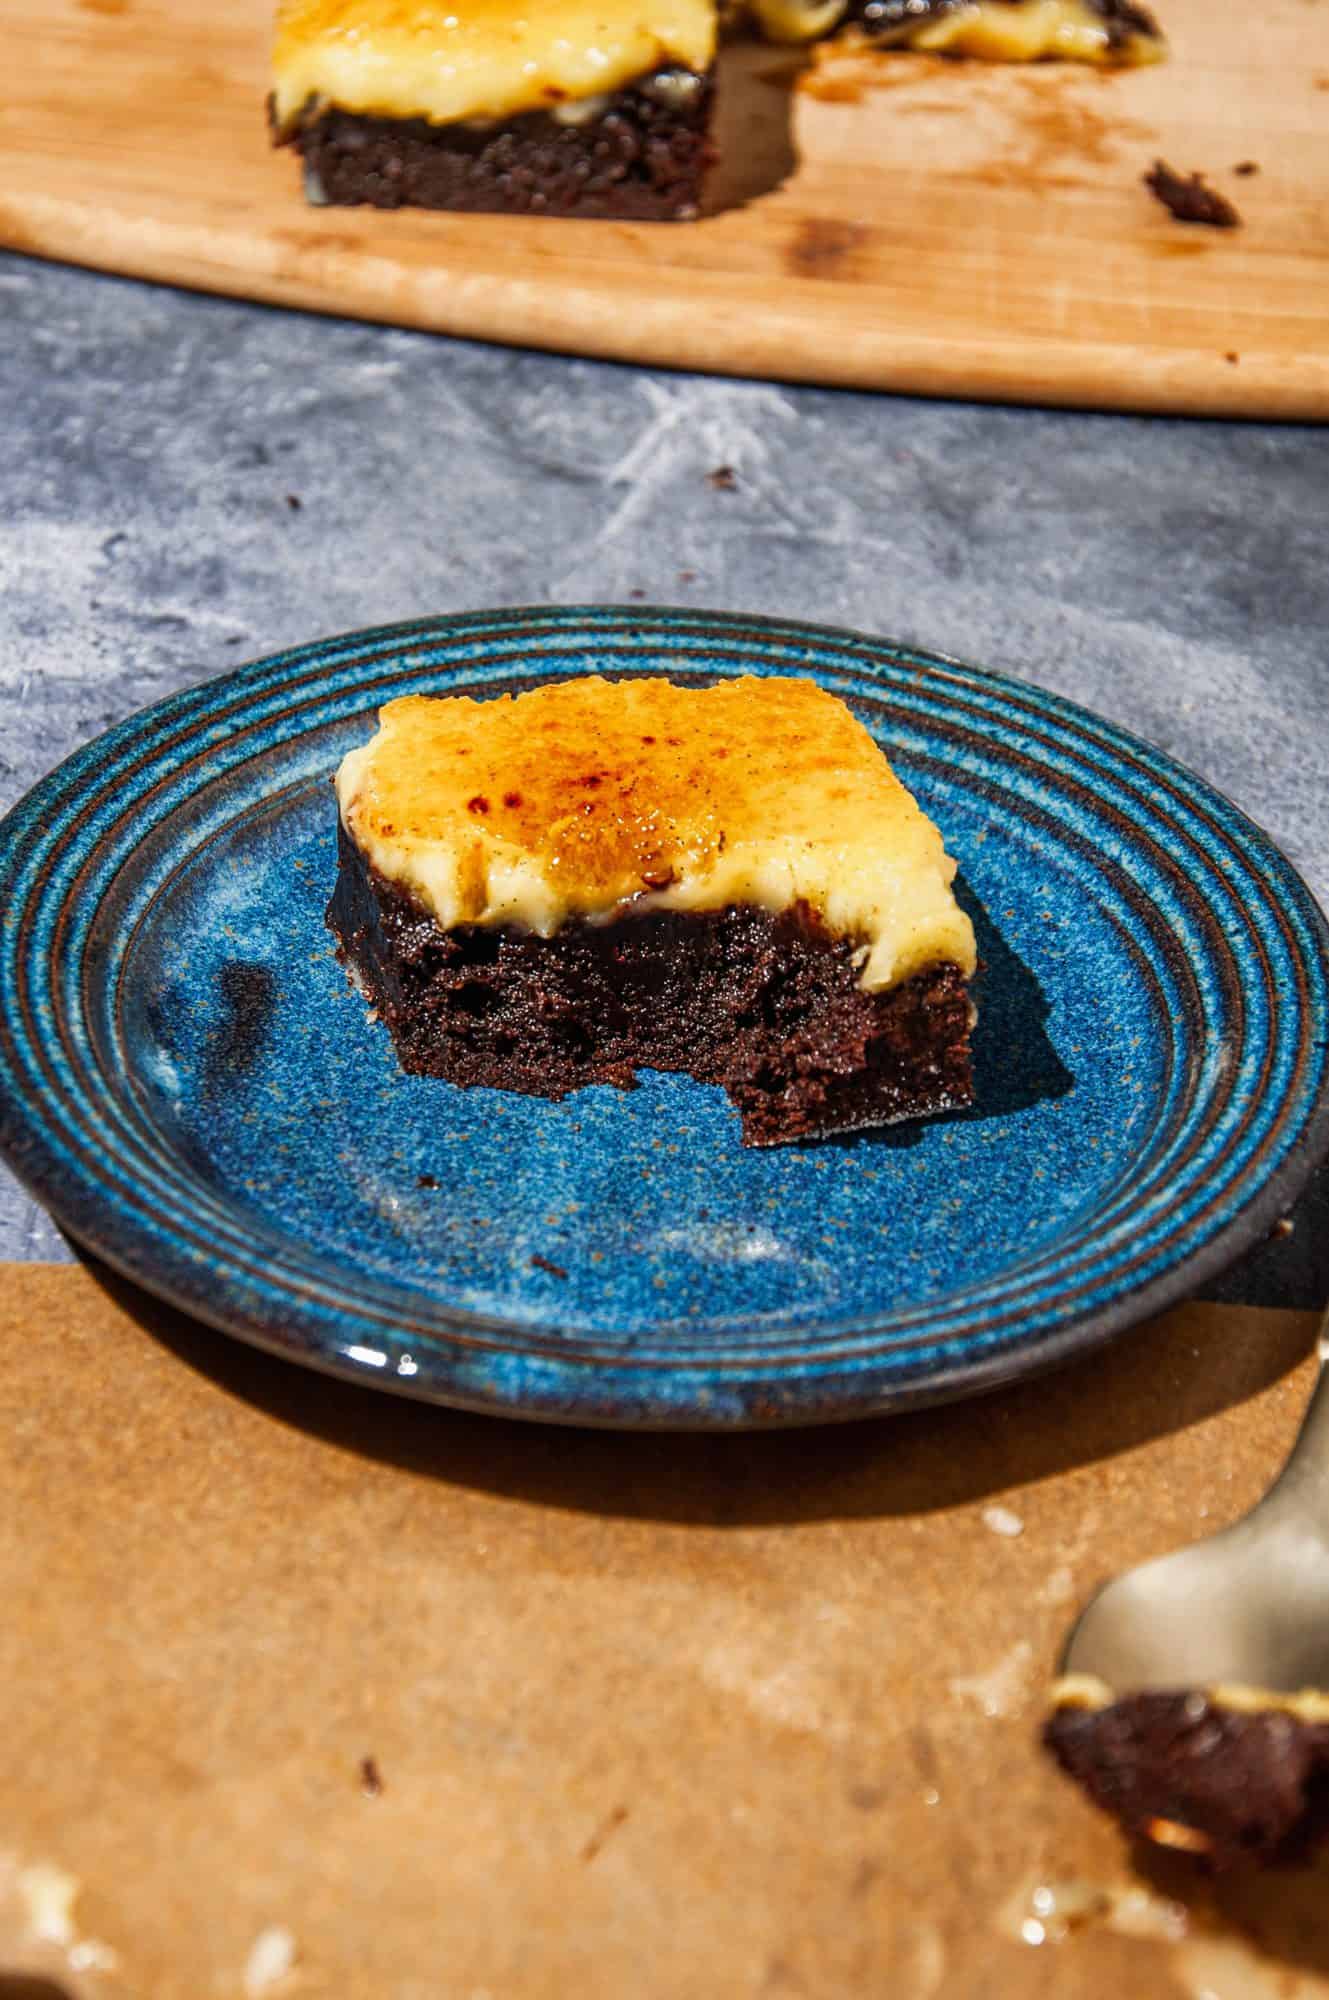 Brownie with creme brûlée top layer with golden crust on a blue plate, with a bite taken out of it.